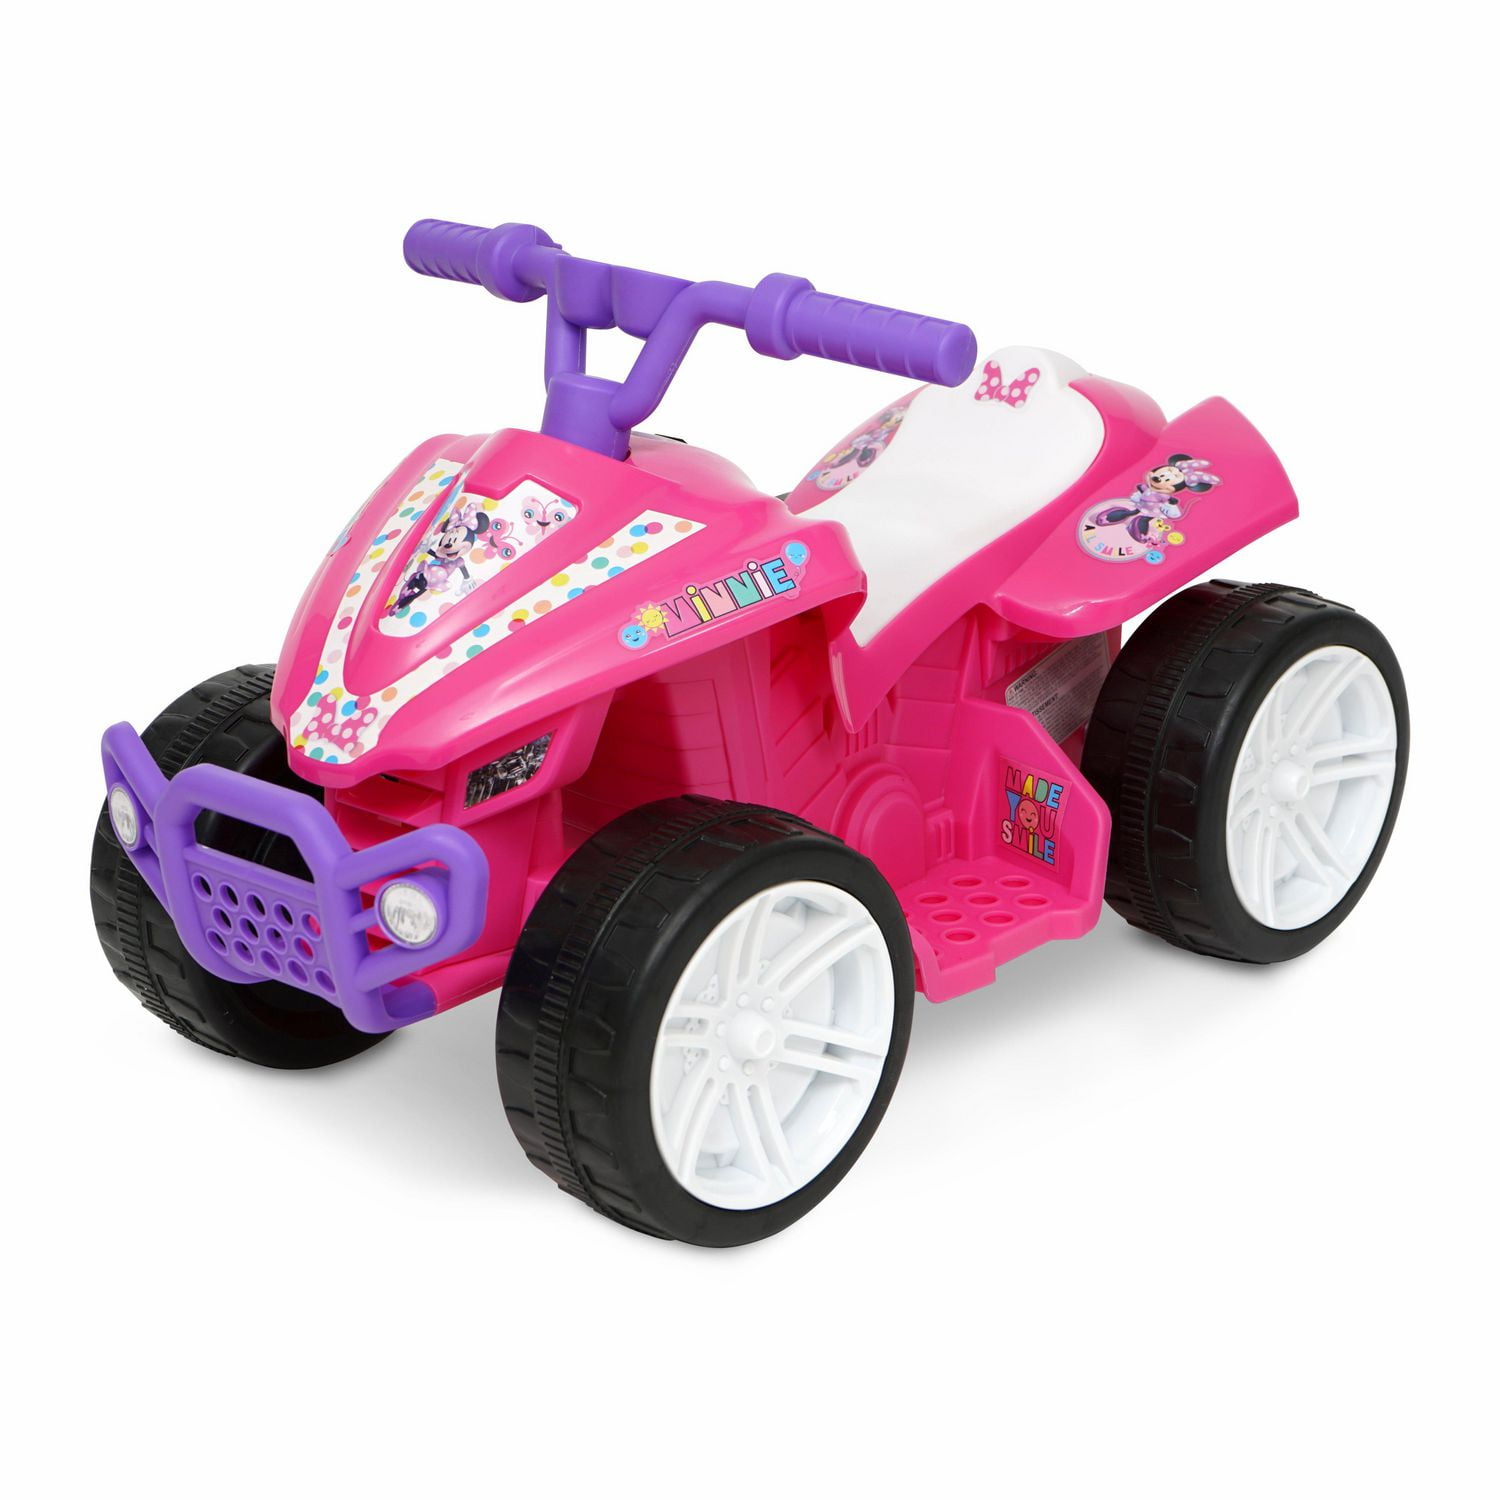 Disney Minnie 6-volt Ride-On Quad for Girls by Huffy, Pink